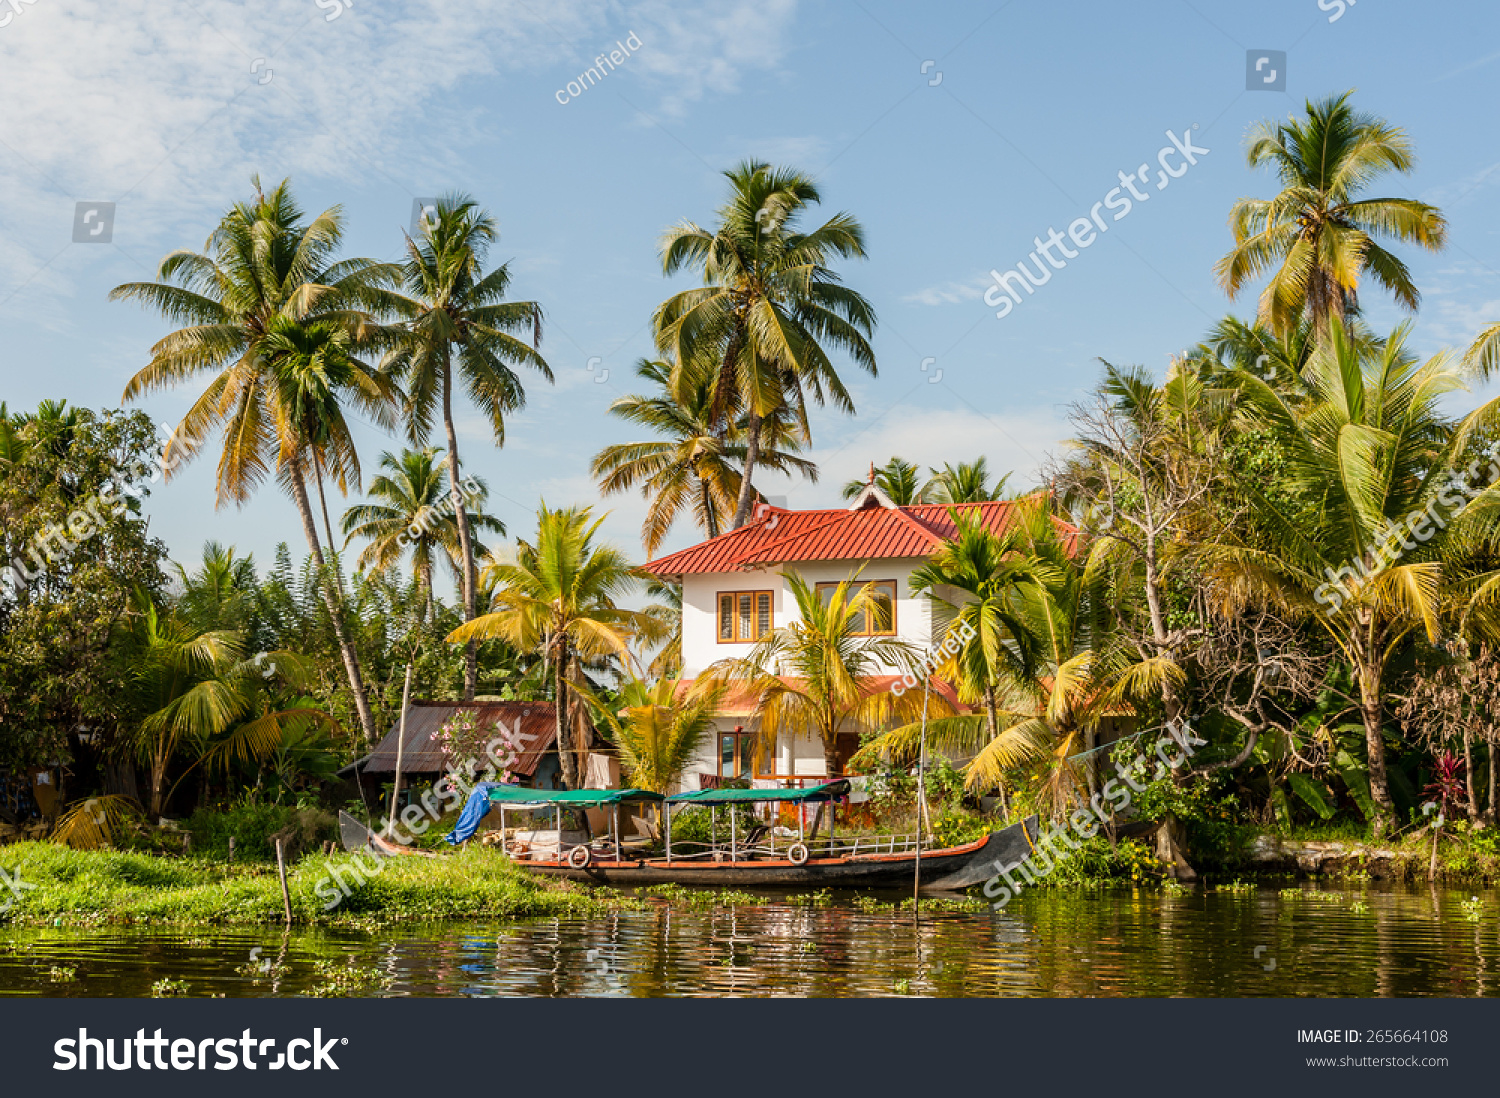 A Beautiful Modern House On The Kerala Backwaters In India. Stock Photo